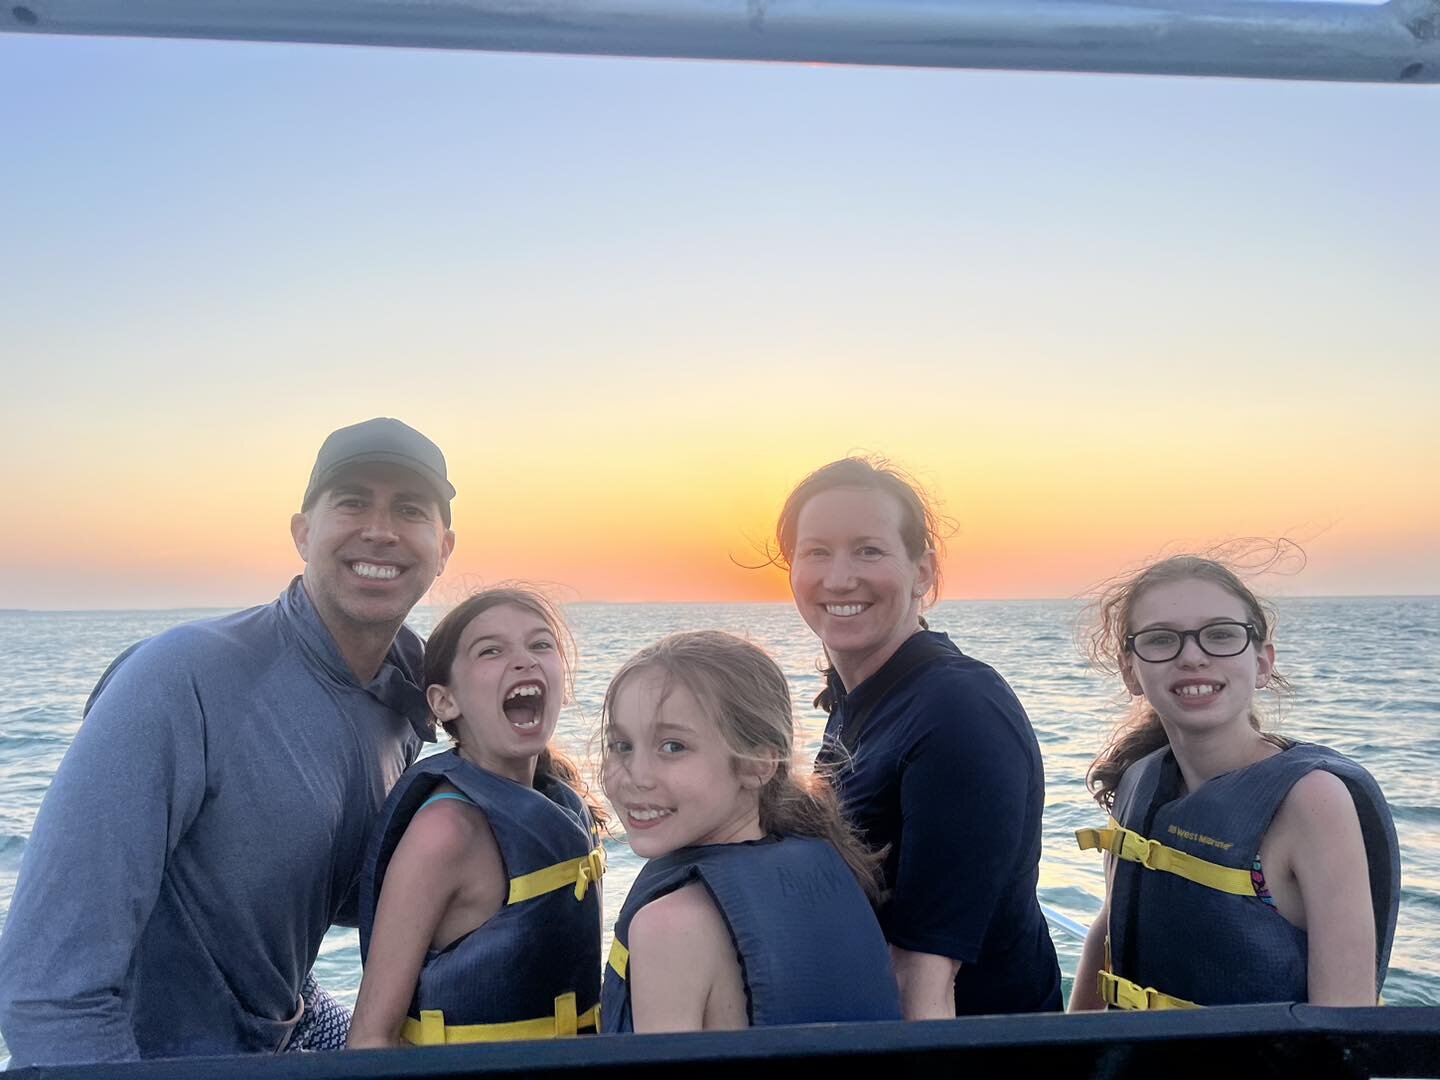 There&rsquo;s no time like #familytime 

Let us help you make #memoriesforlife

Book at mellowkw.com or Contact Us on the site for more info

#sup #sunset  #ahhhmazing #Escape #breathe #familyadventures